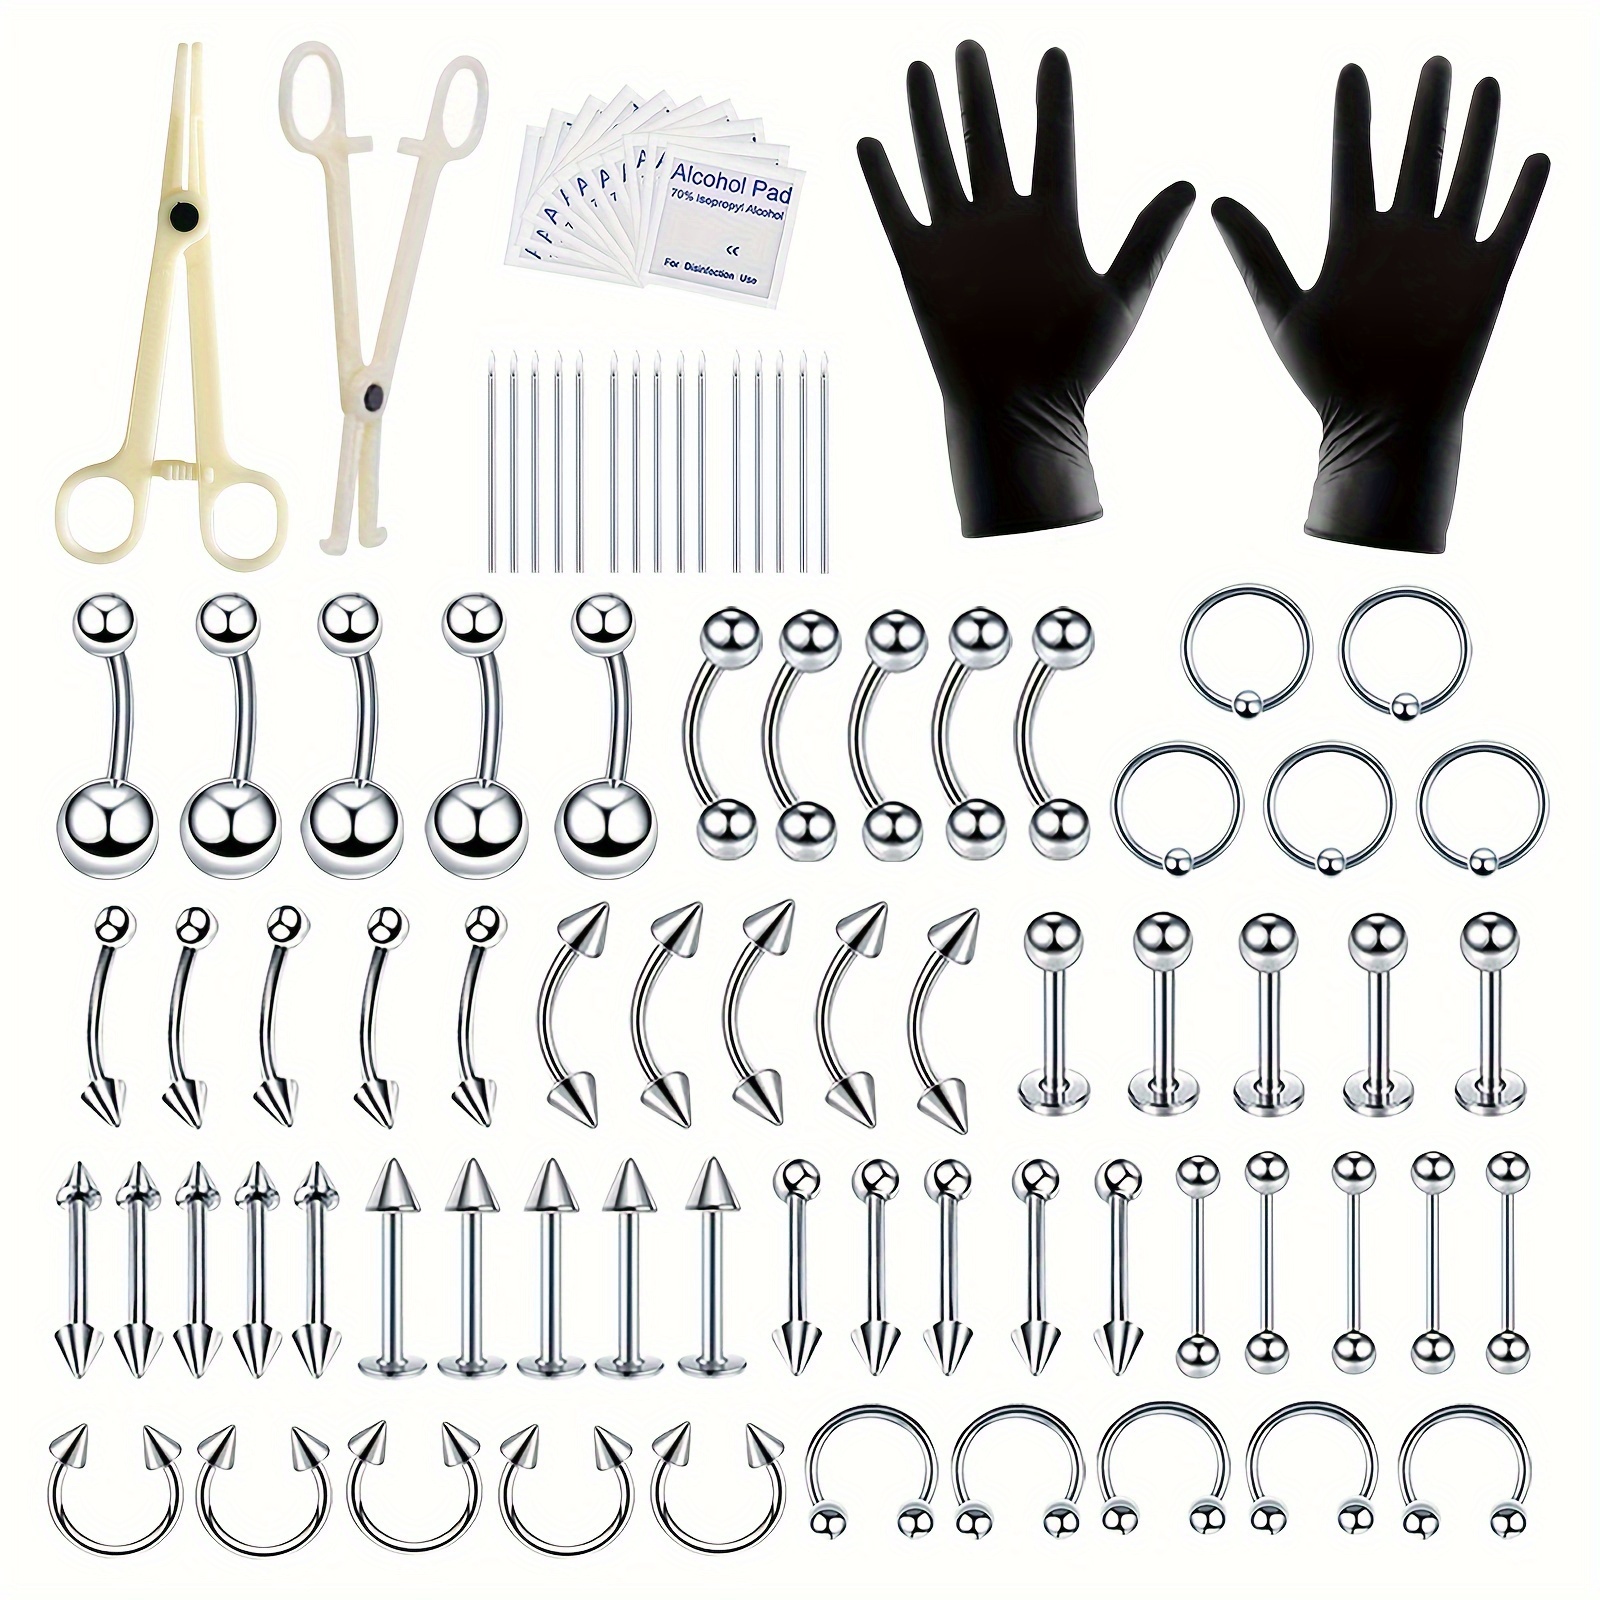 84pcs body septum piercing kit tools for nose tongue lip ear eyebrow belly button cartilage tragus industrial barbell helix daith piercing jewelry clamps